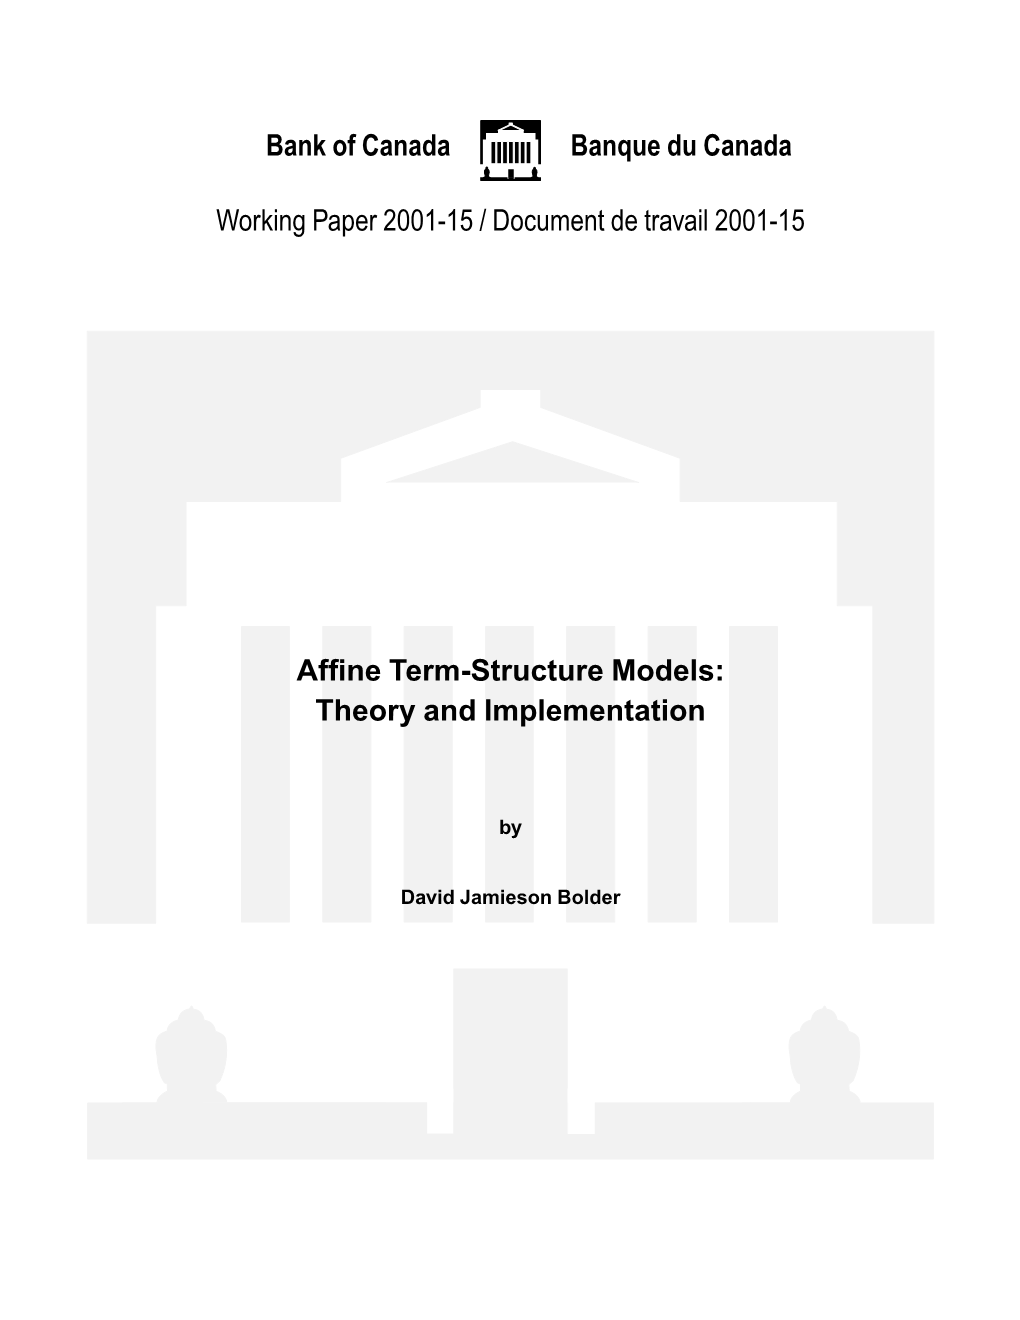 Affine Term-Structure Models: Theory and Implementation